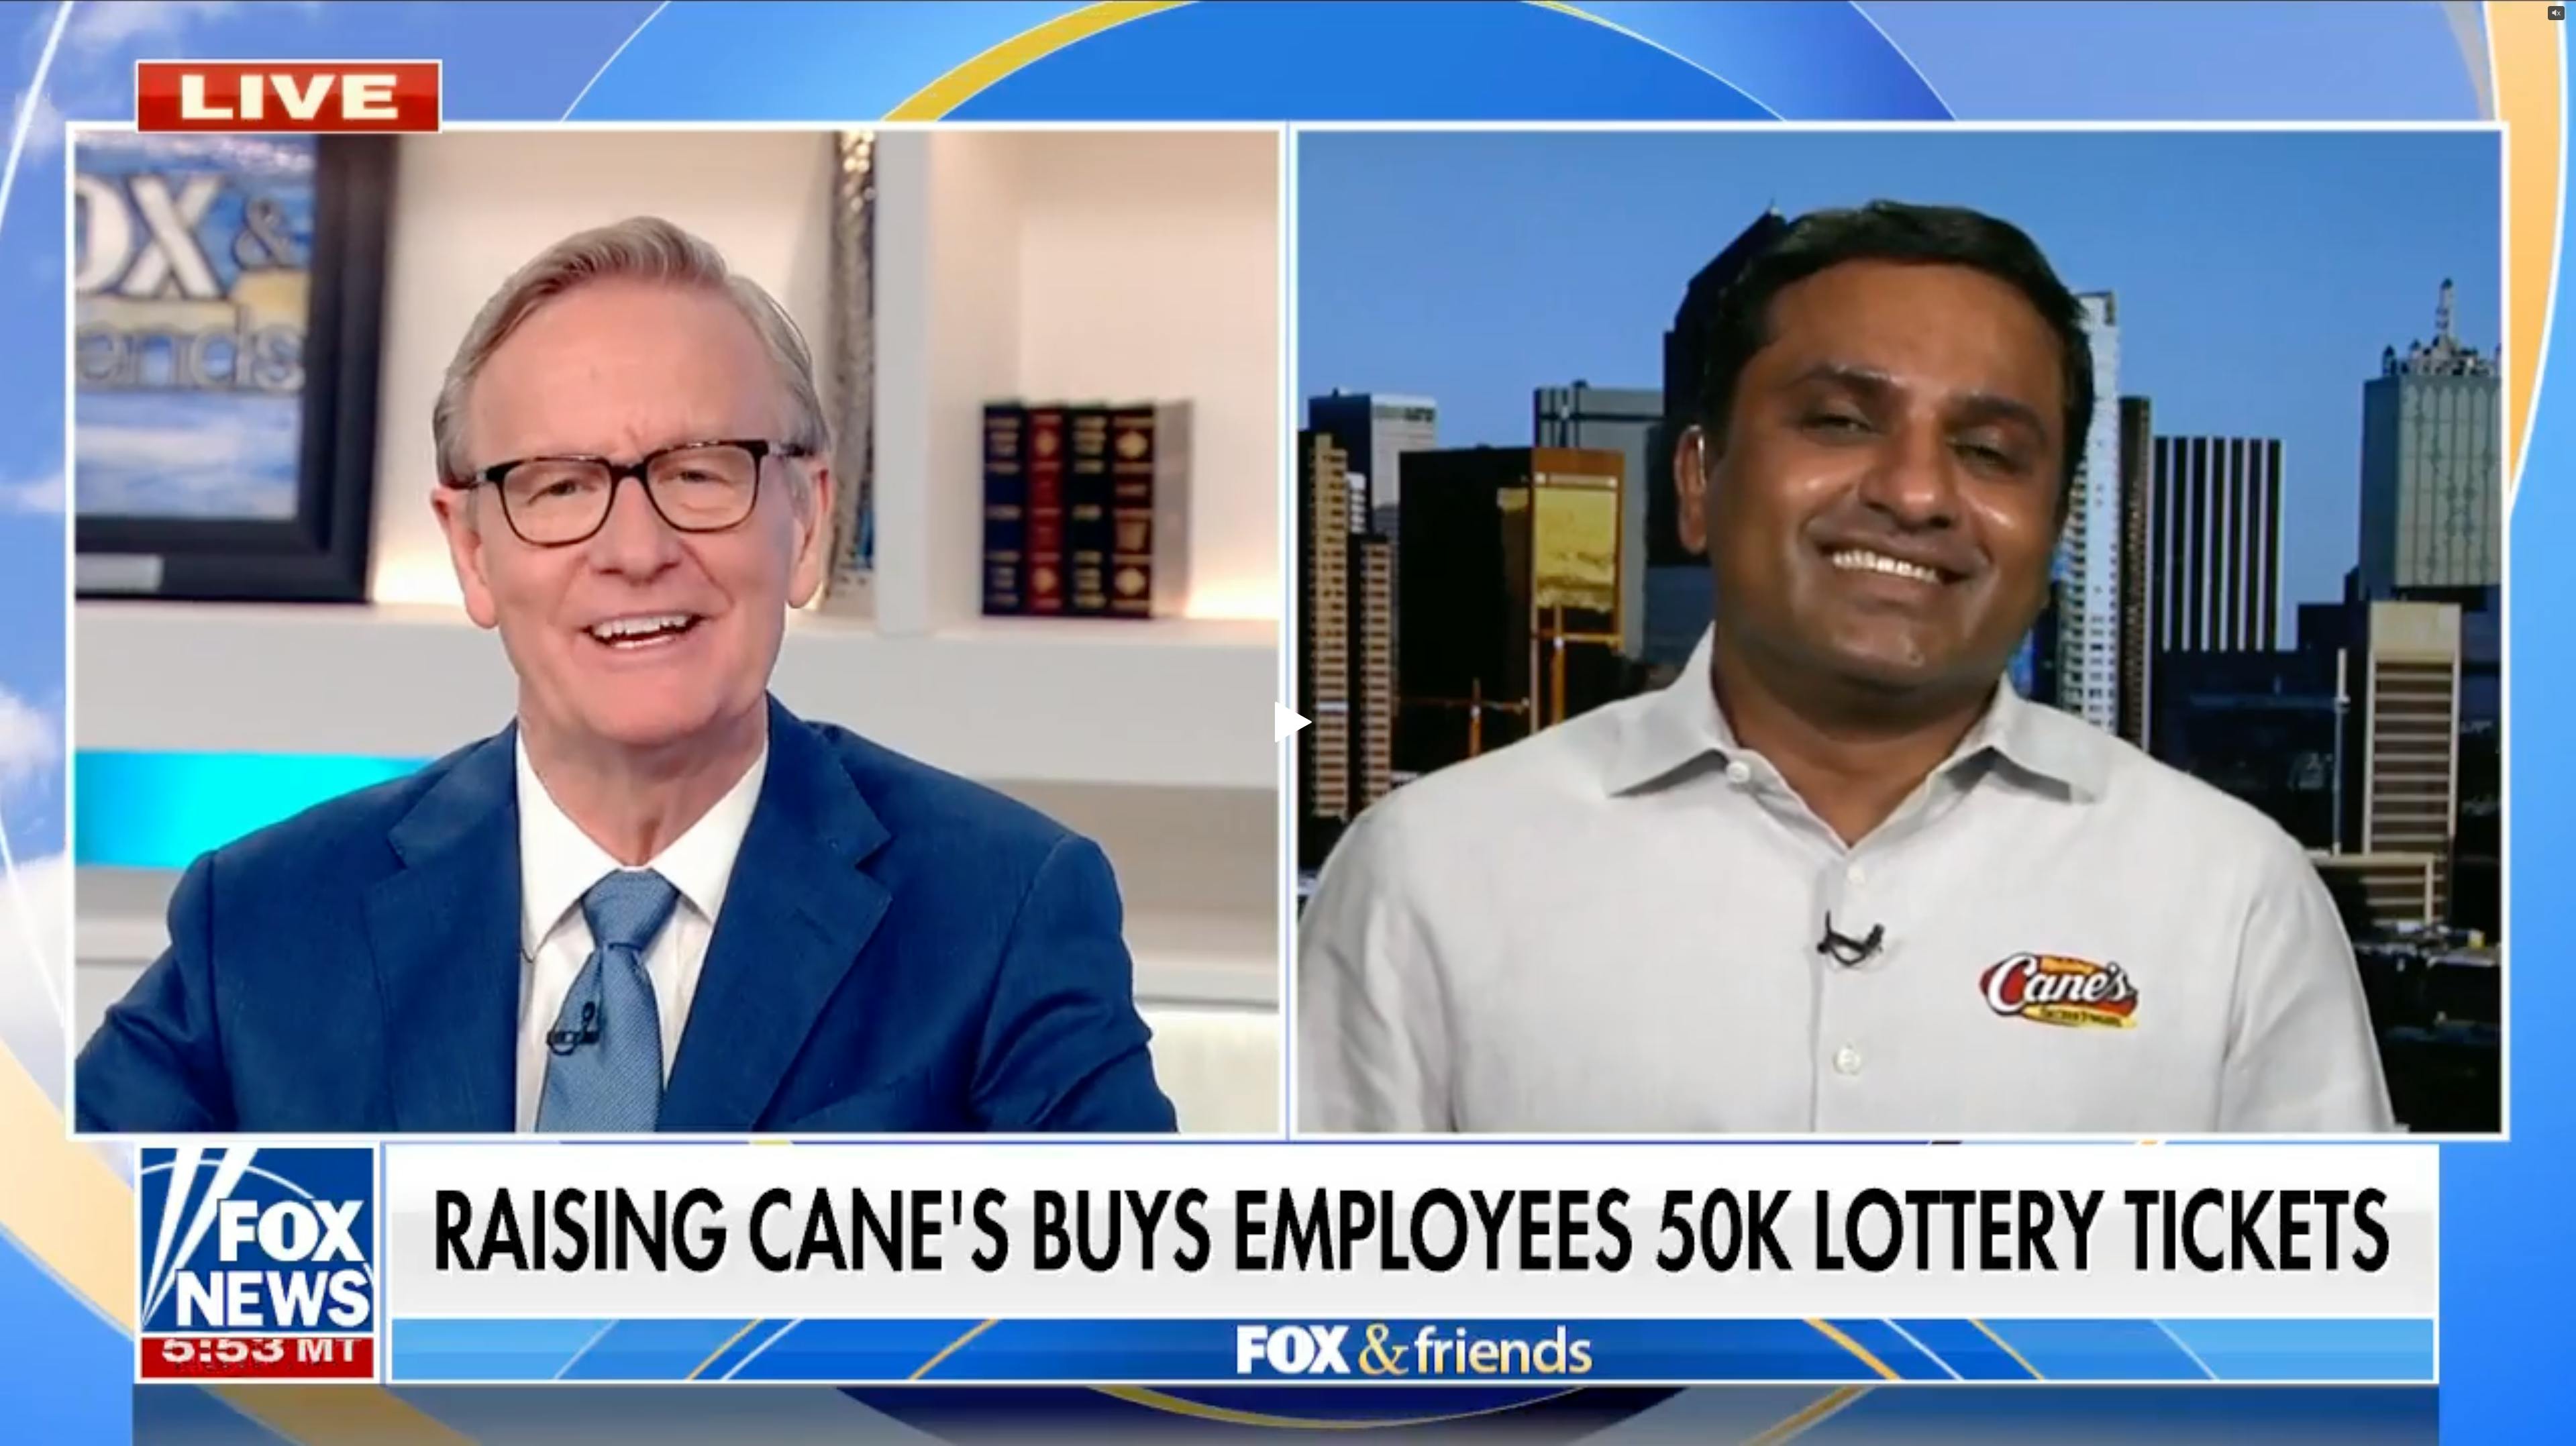 Raising Cane's Co-CEO being interviewed on the news